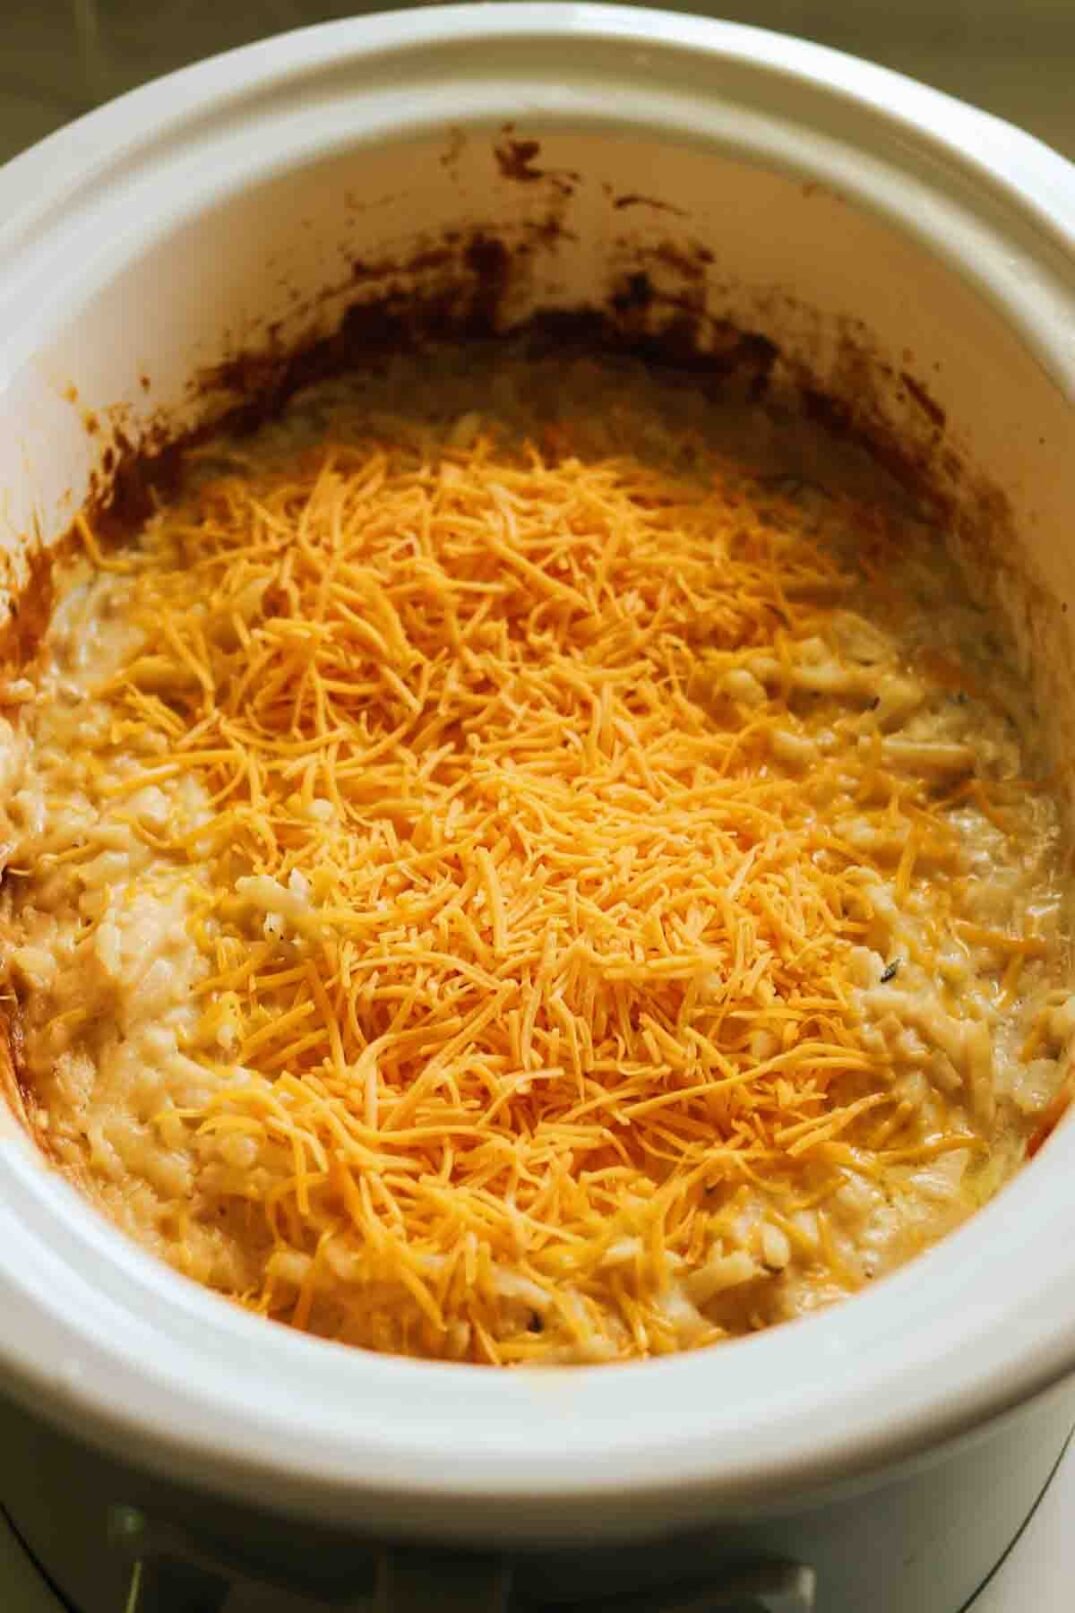 sharp cheddar being poured on top of potatoes in a crockpot. 